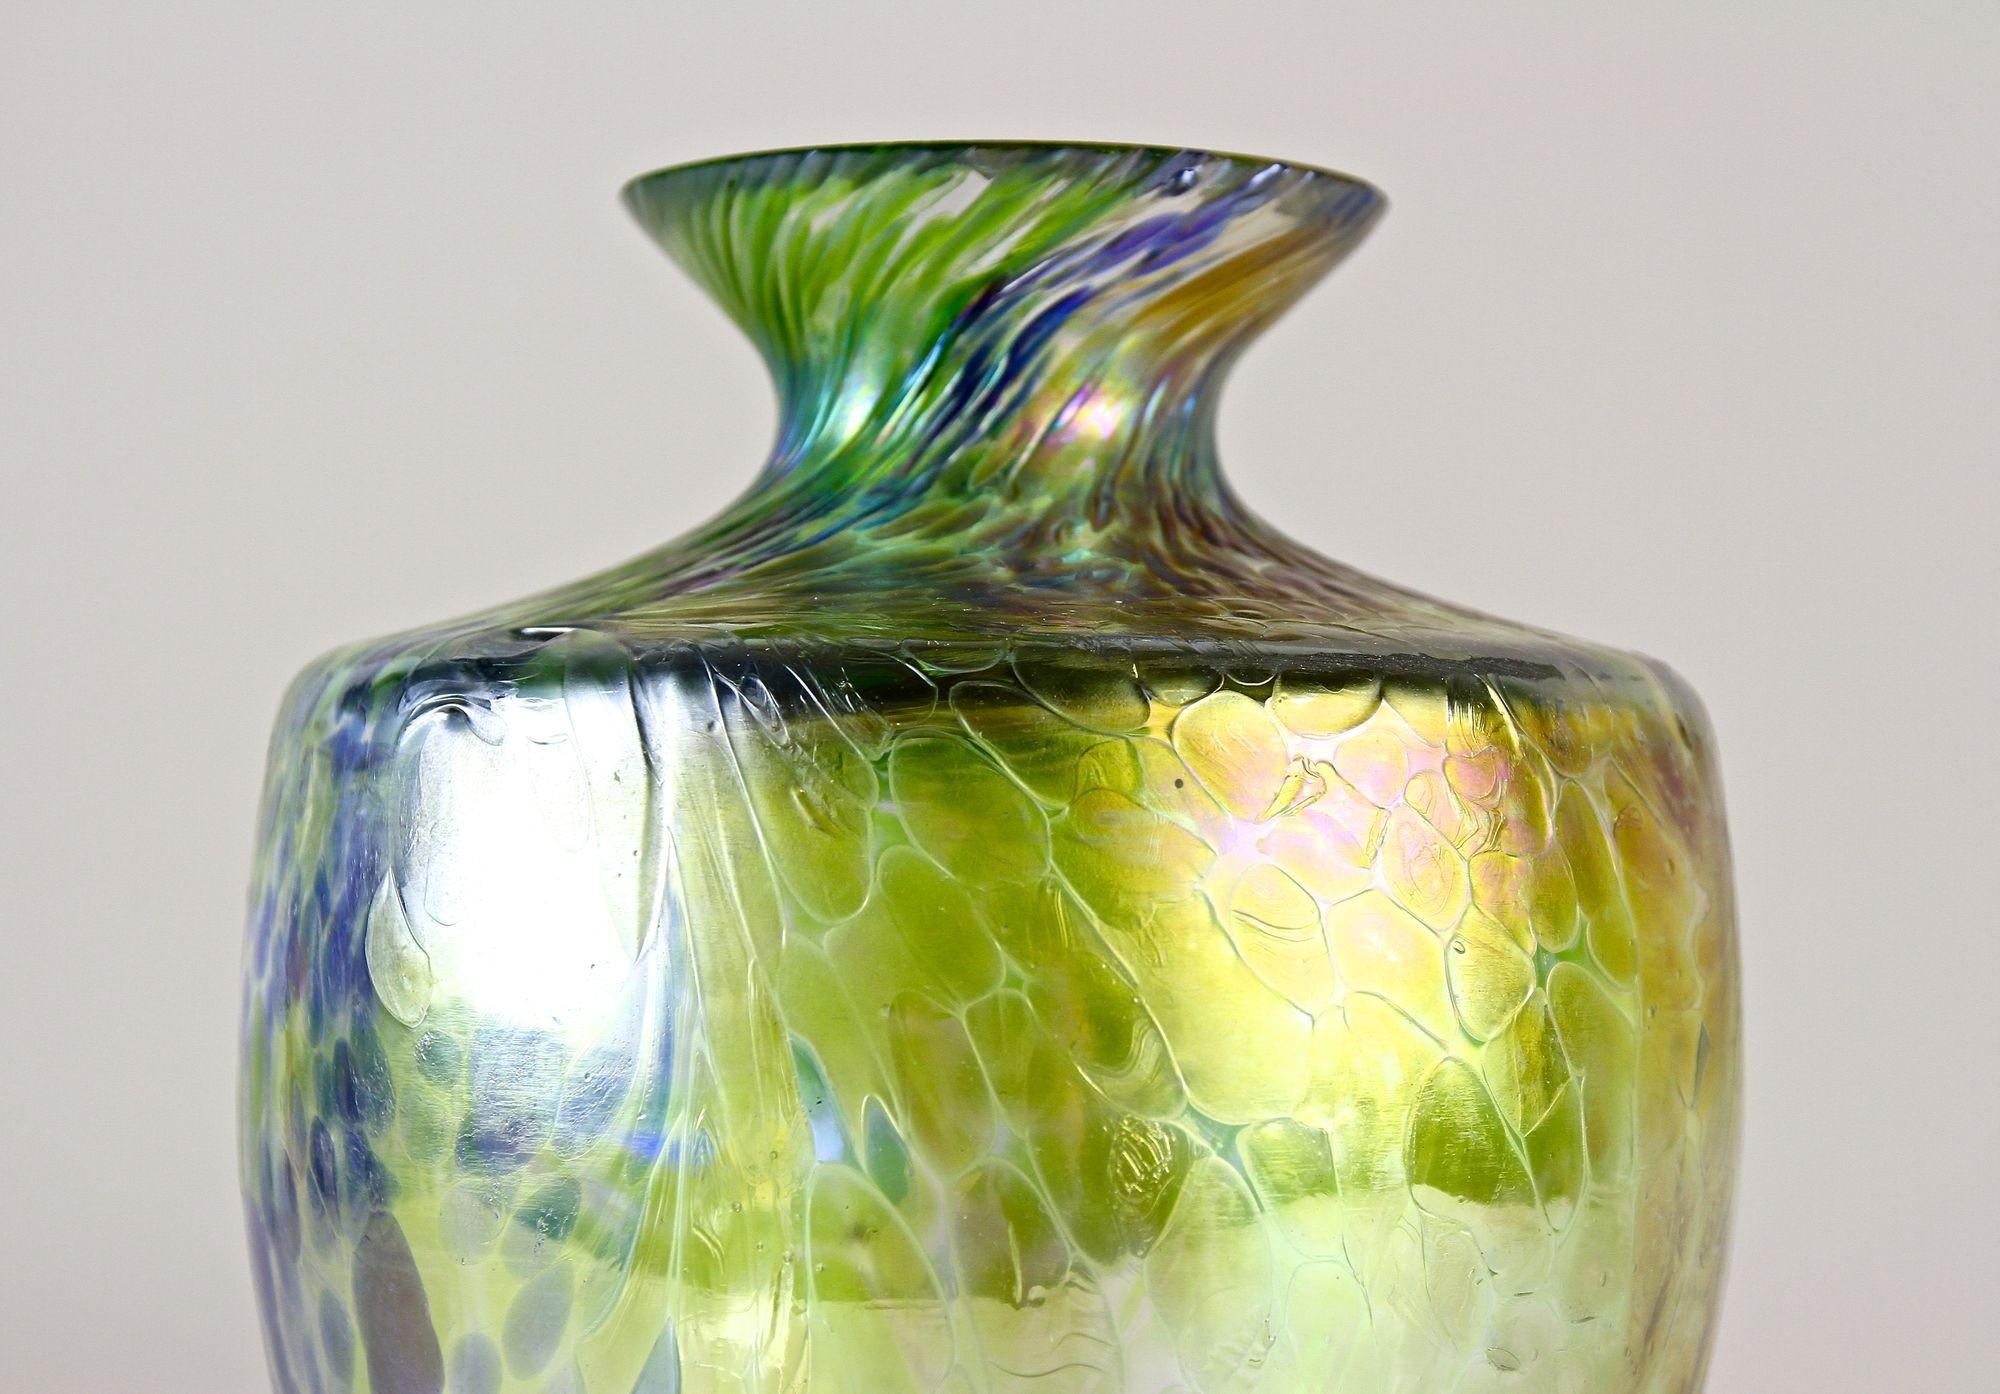 Iridescent Art Nouveau Glass Vase Attributed To Fritz Heckert, Bohemia ca. 1905 For Sale 5